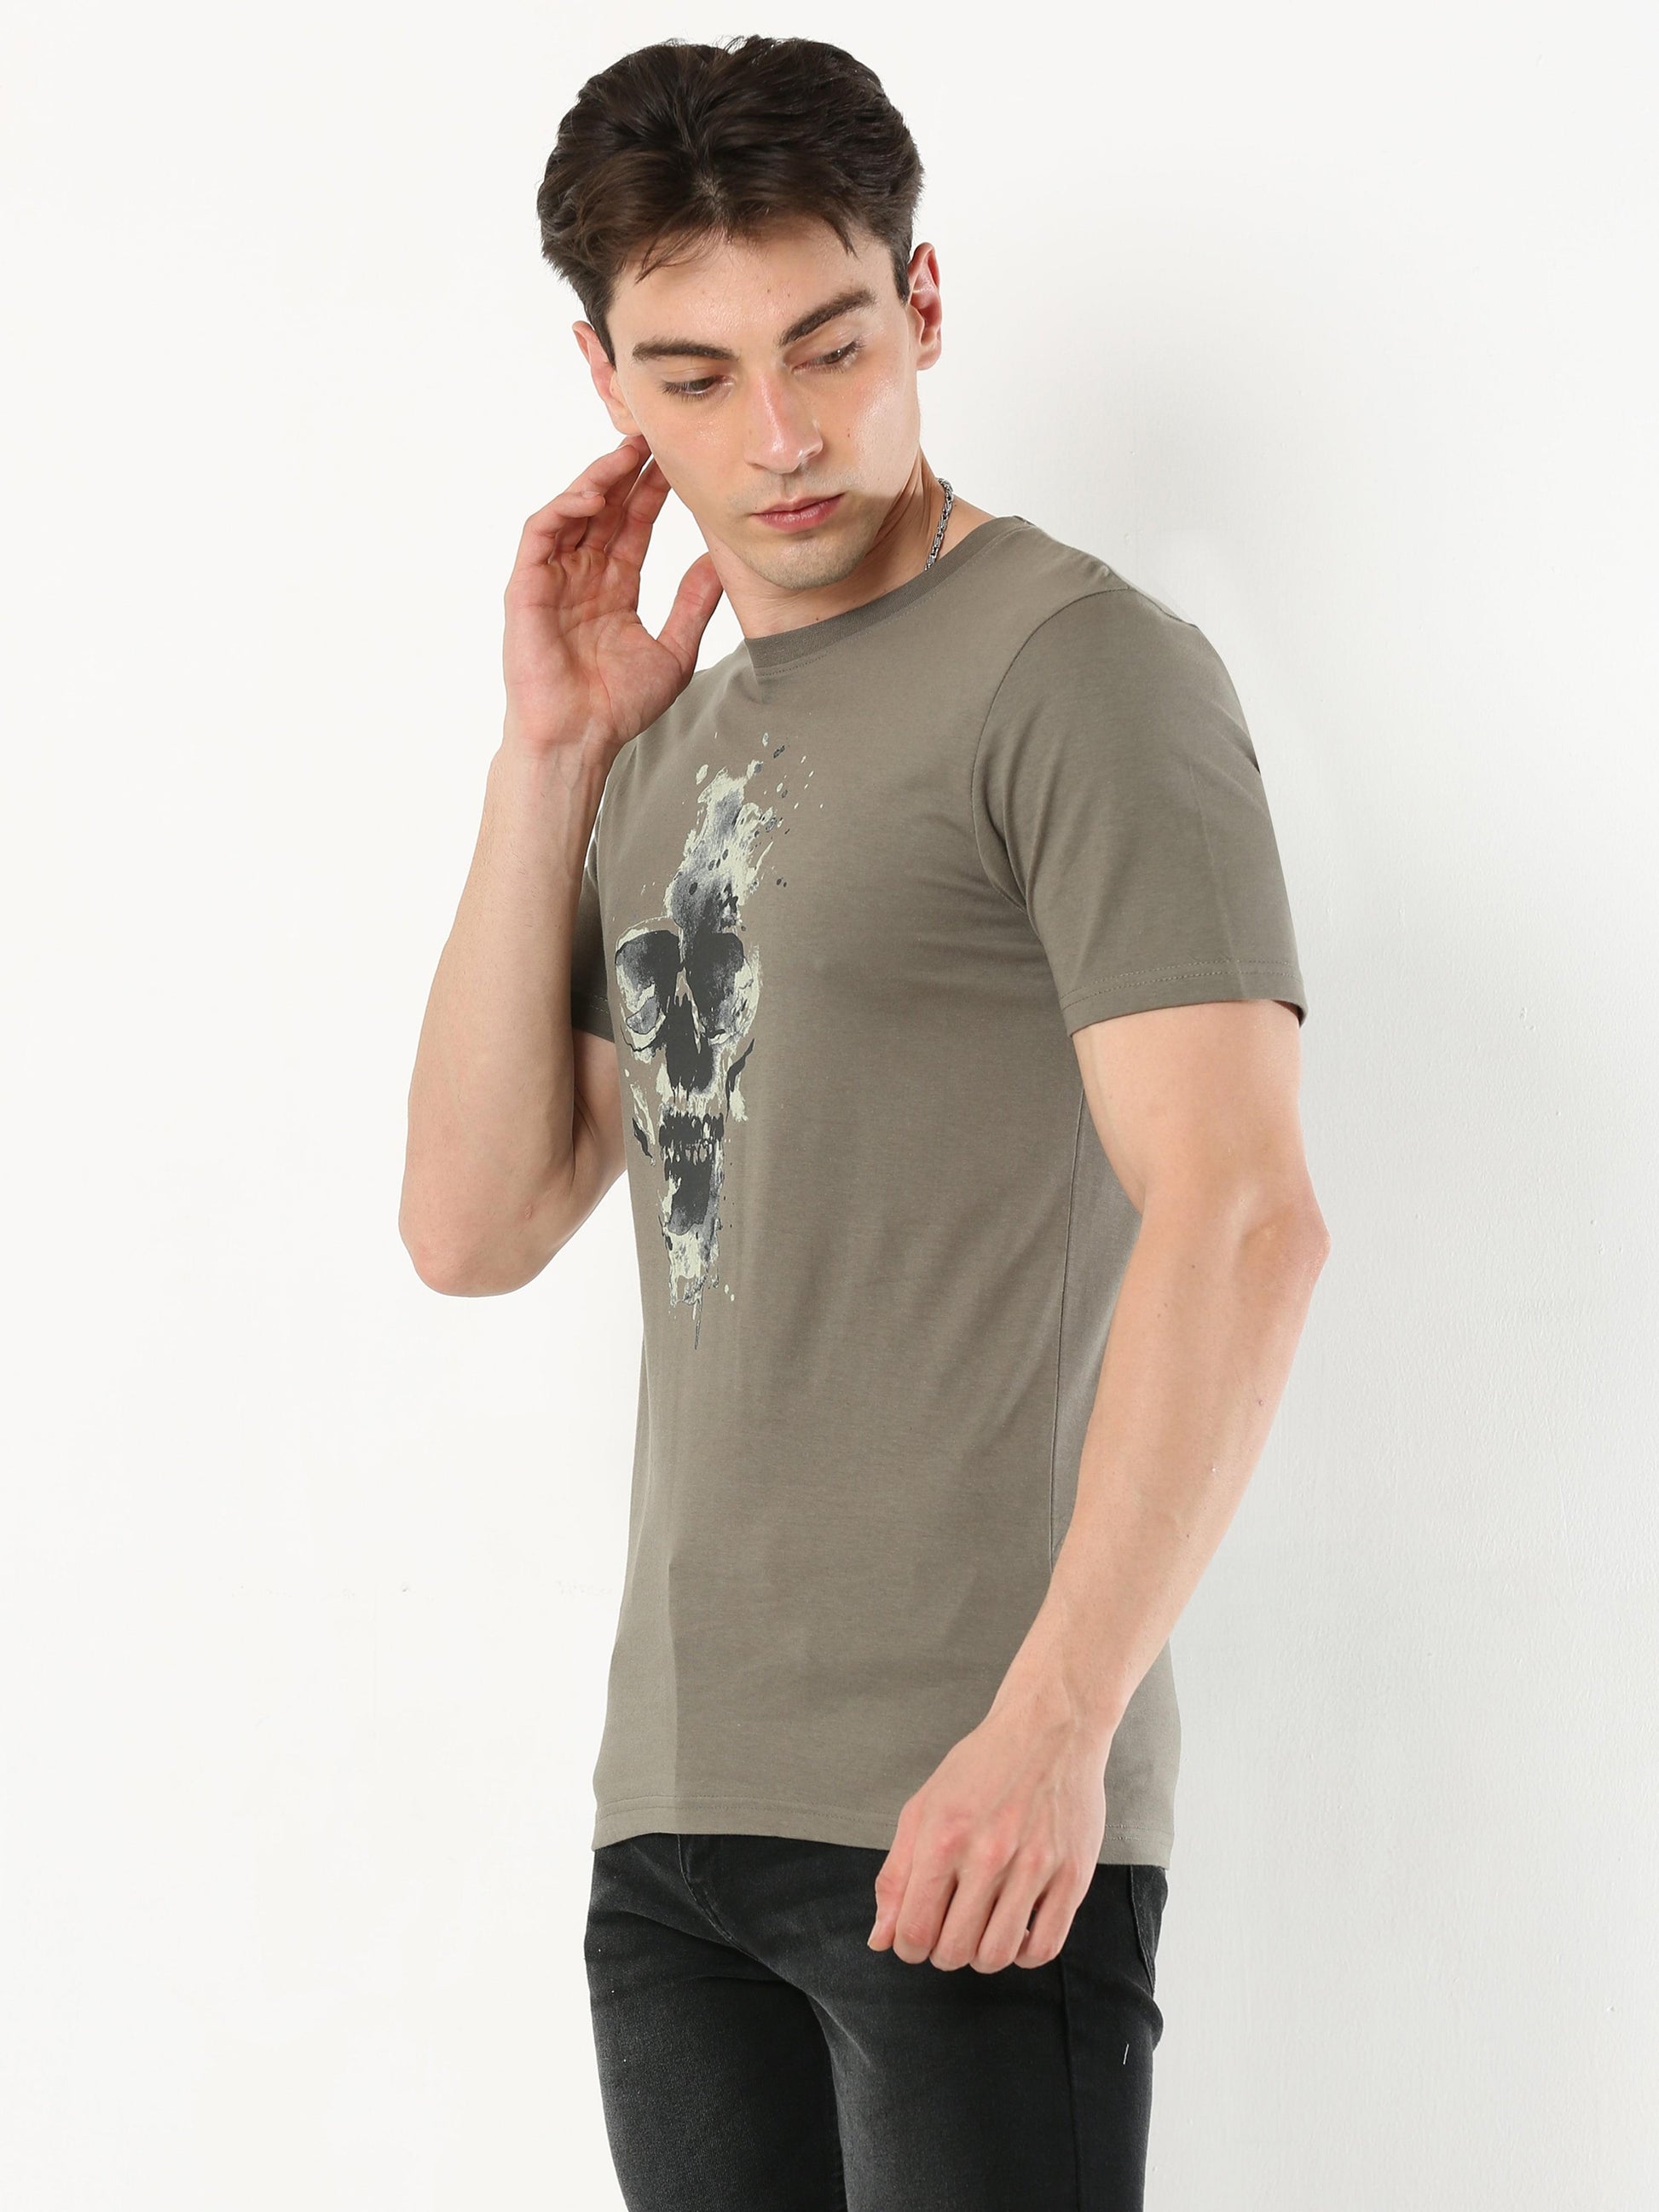 Men's casual T-Shirt - Ghost Rider